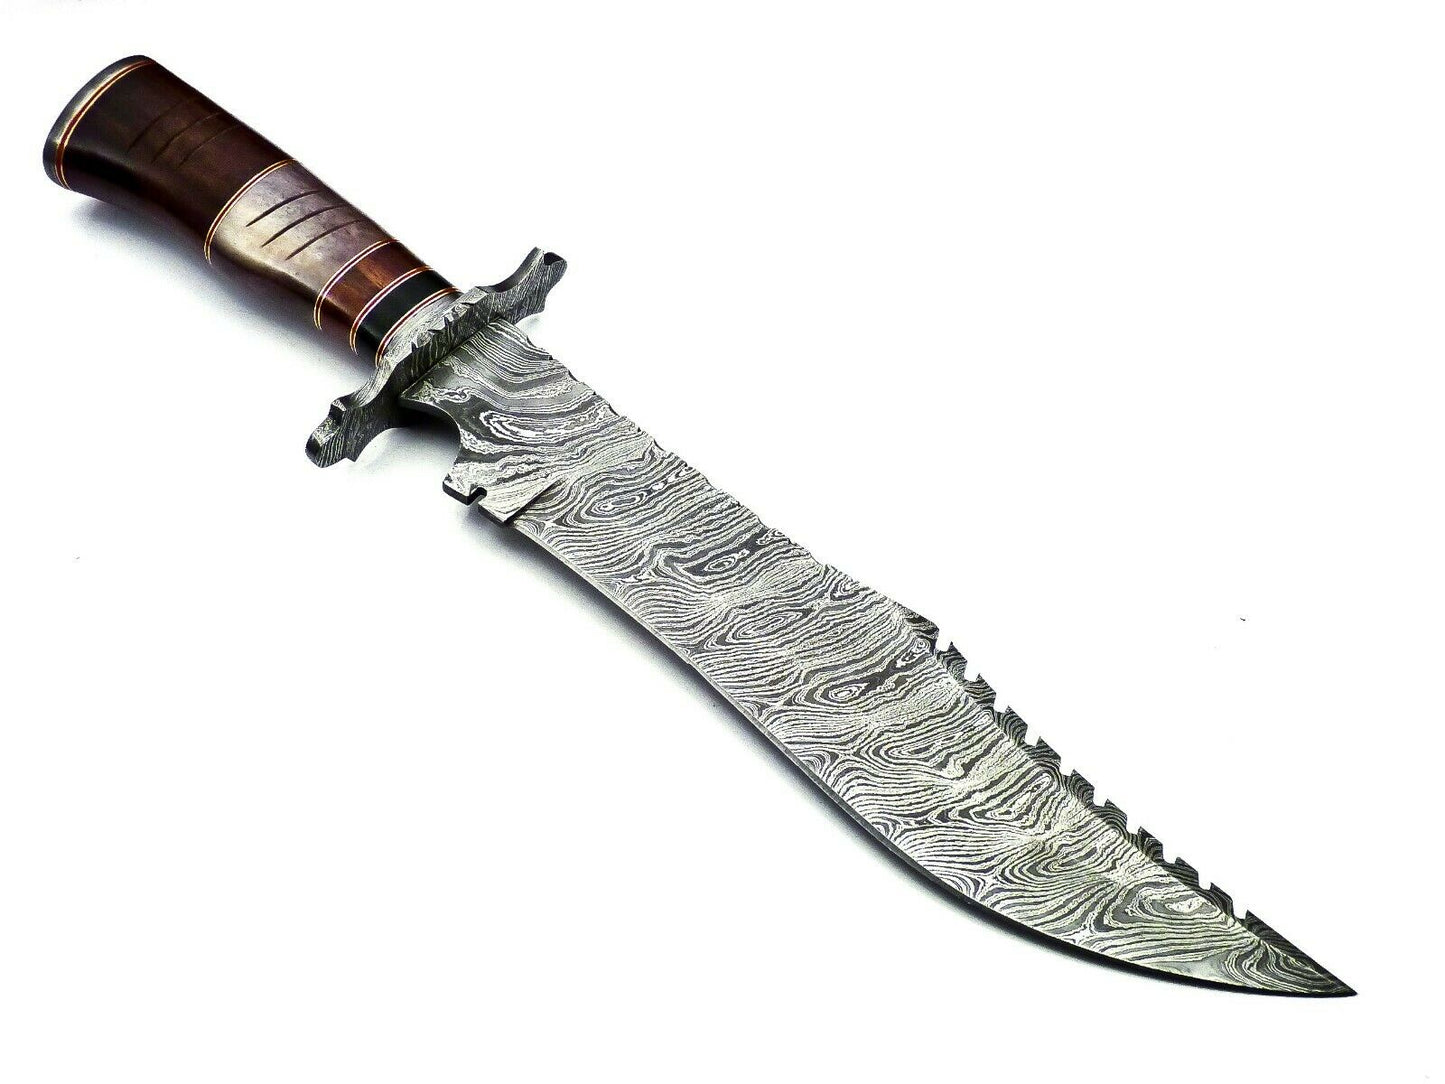 Handmade Damascus Steel 15 Inches Bowie Knife - Rose Wood & Bull Horn Handle